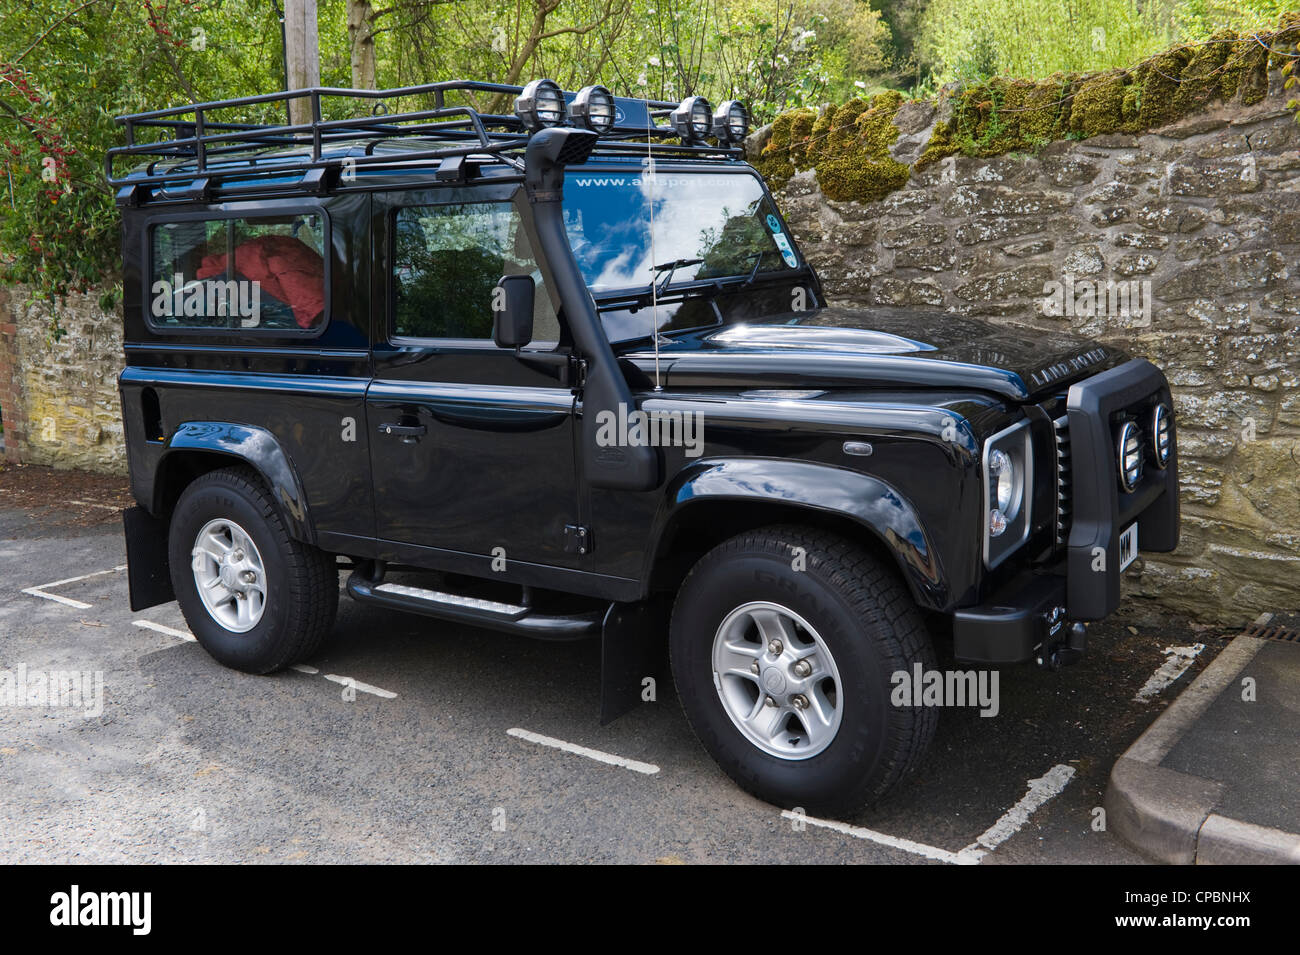 Black Land Rover Defender 90 2.4TDCi 4x4 with safari snorkel and roof rack Stock Photo